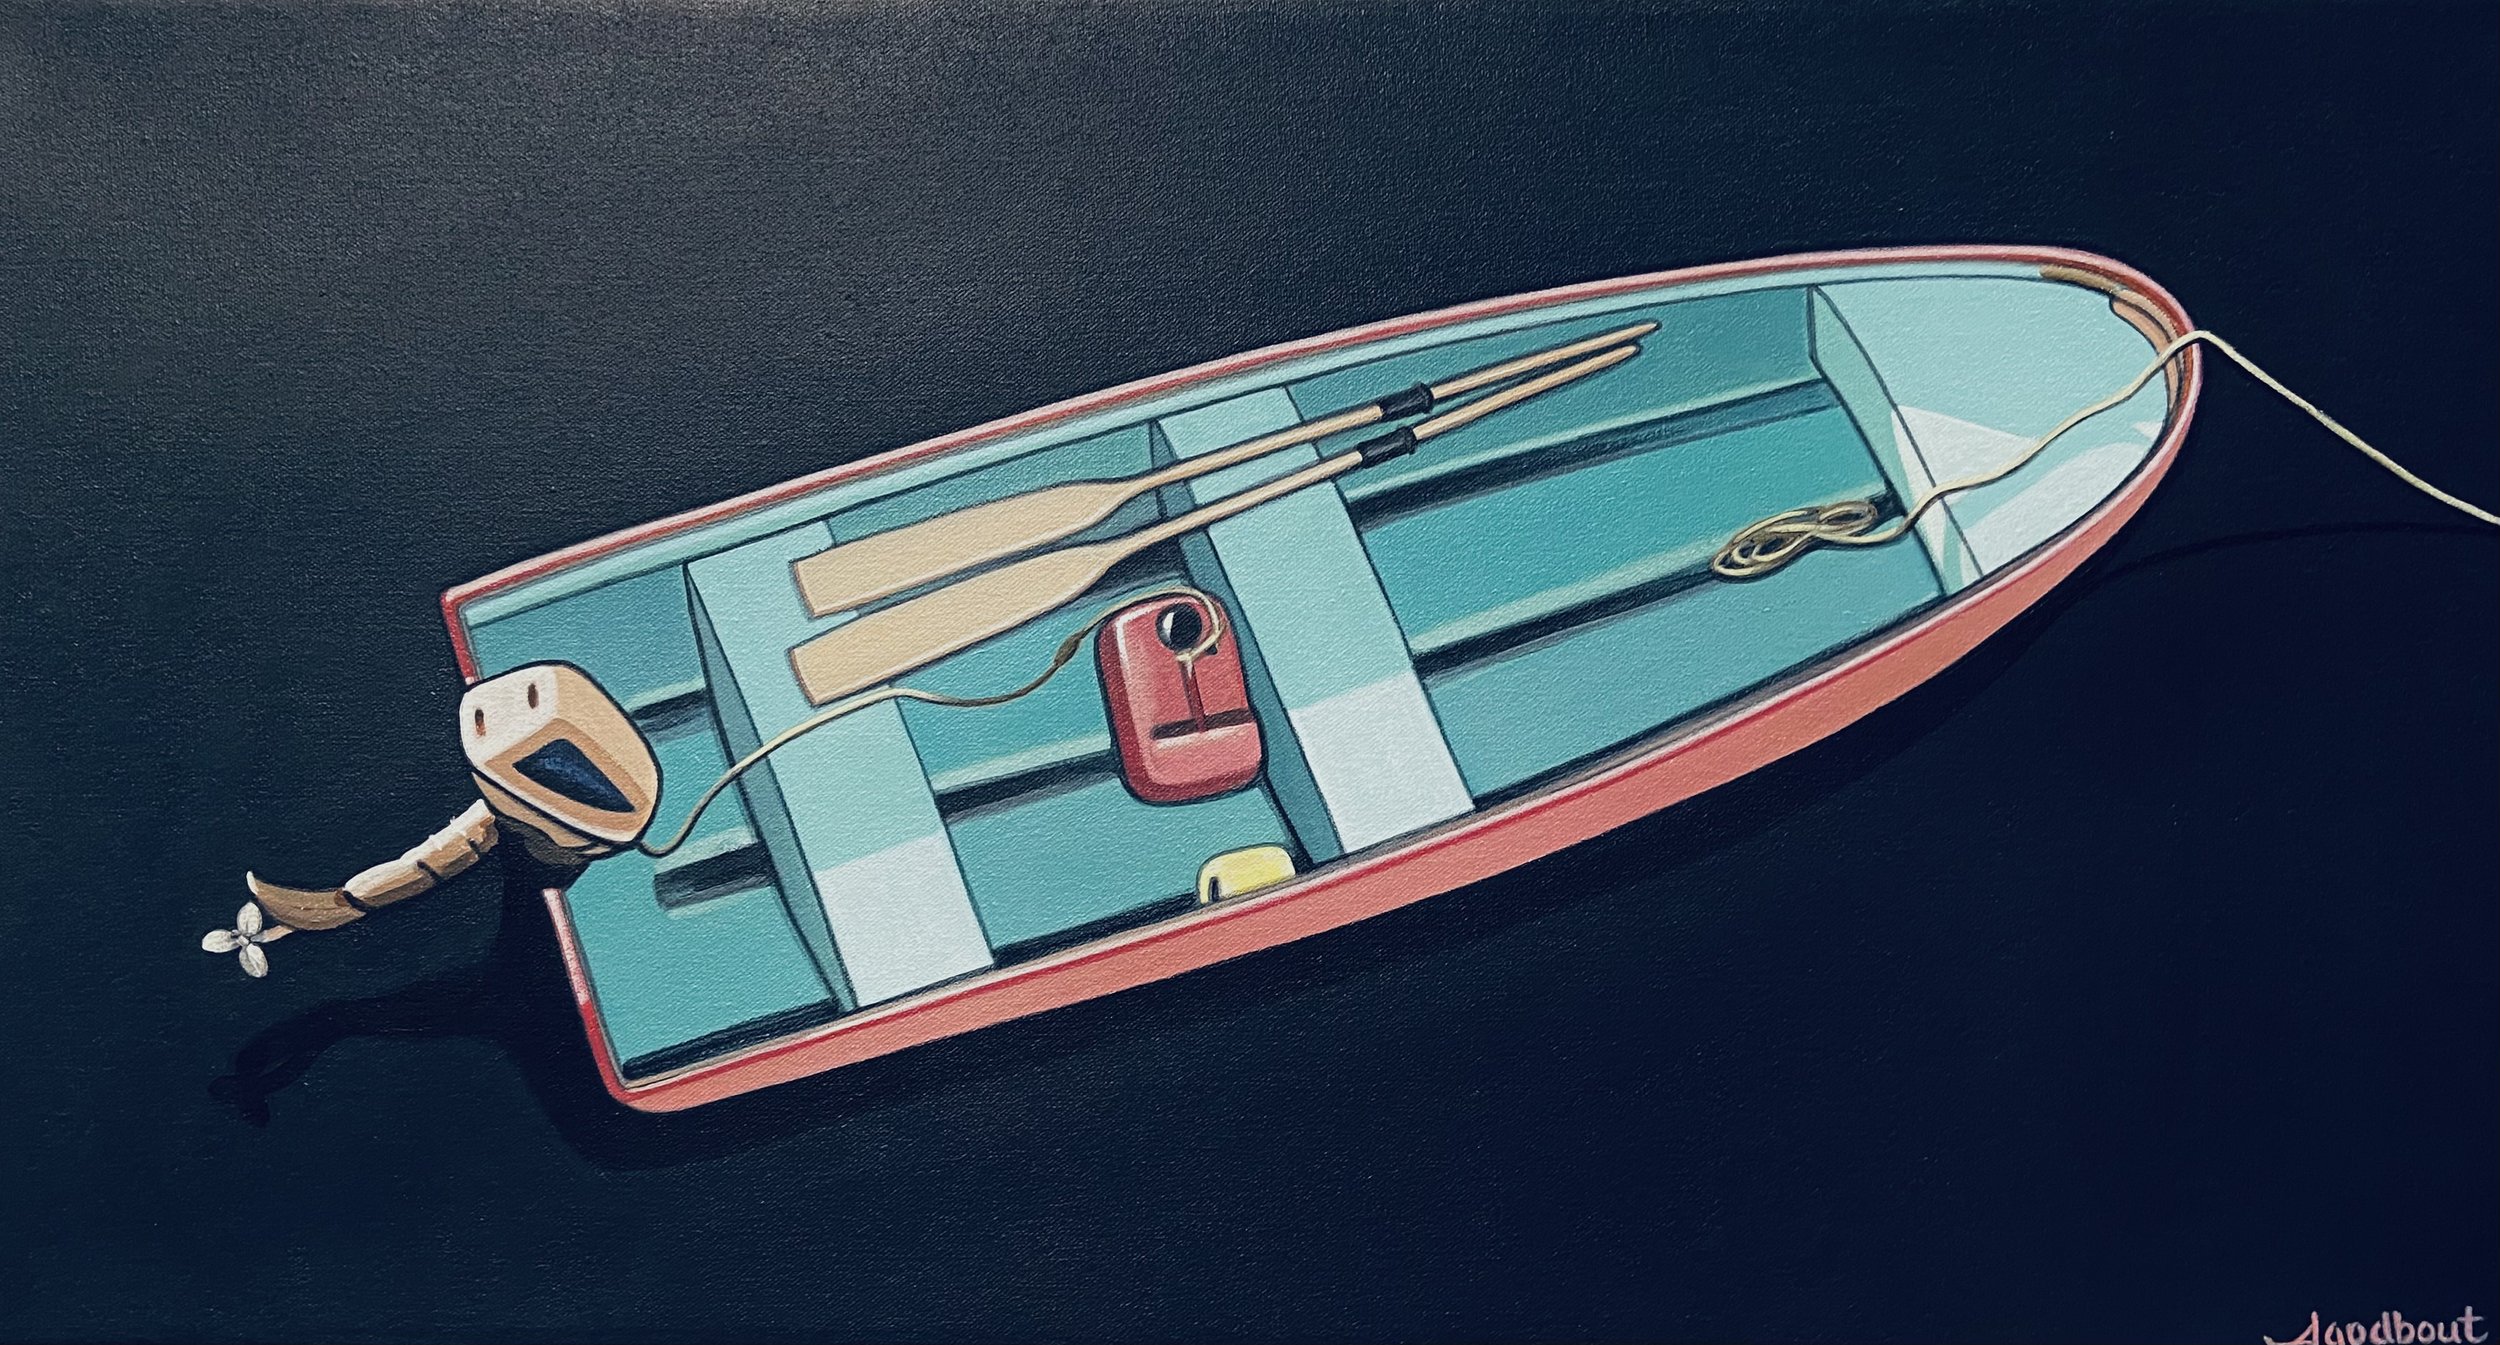 Turquoise and Red Skiff